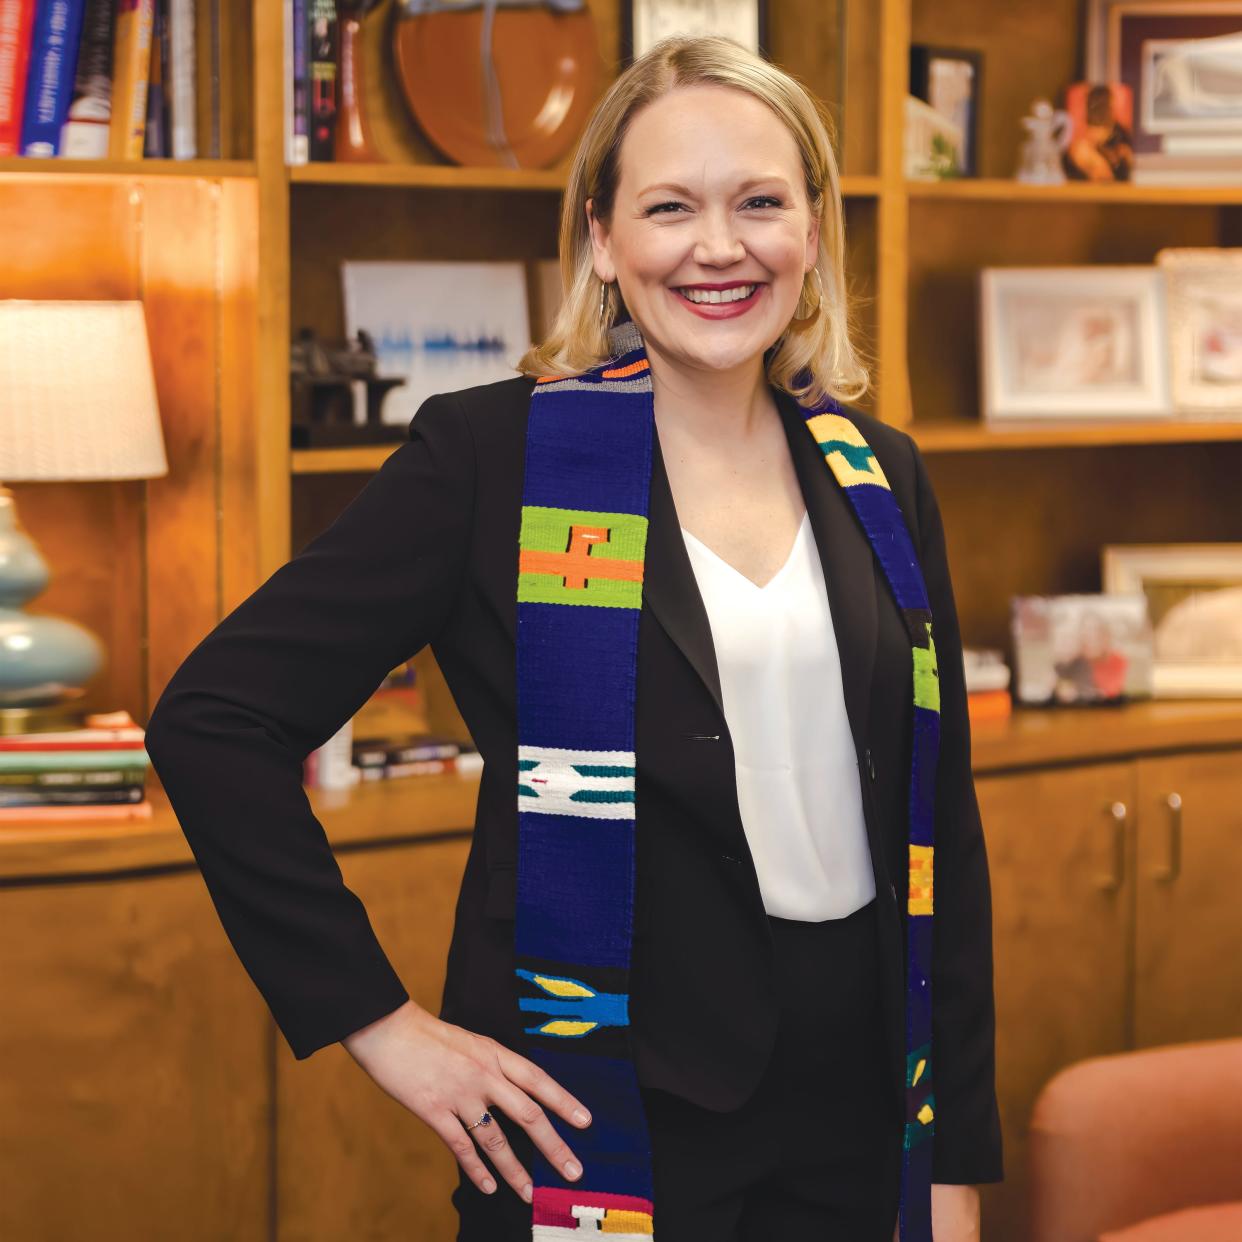 United Ministries director Lizzie Bebber is an ordained Baptist minister. She says wearing the stole keeps her grounded in her mission to help those living in poverty and homelessness.